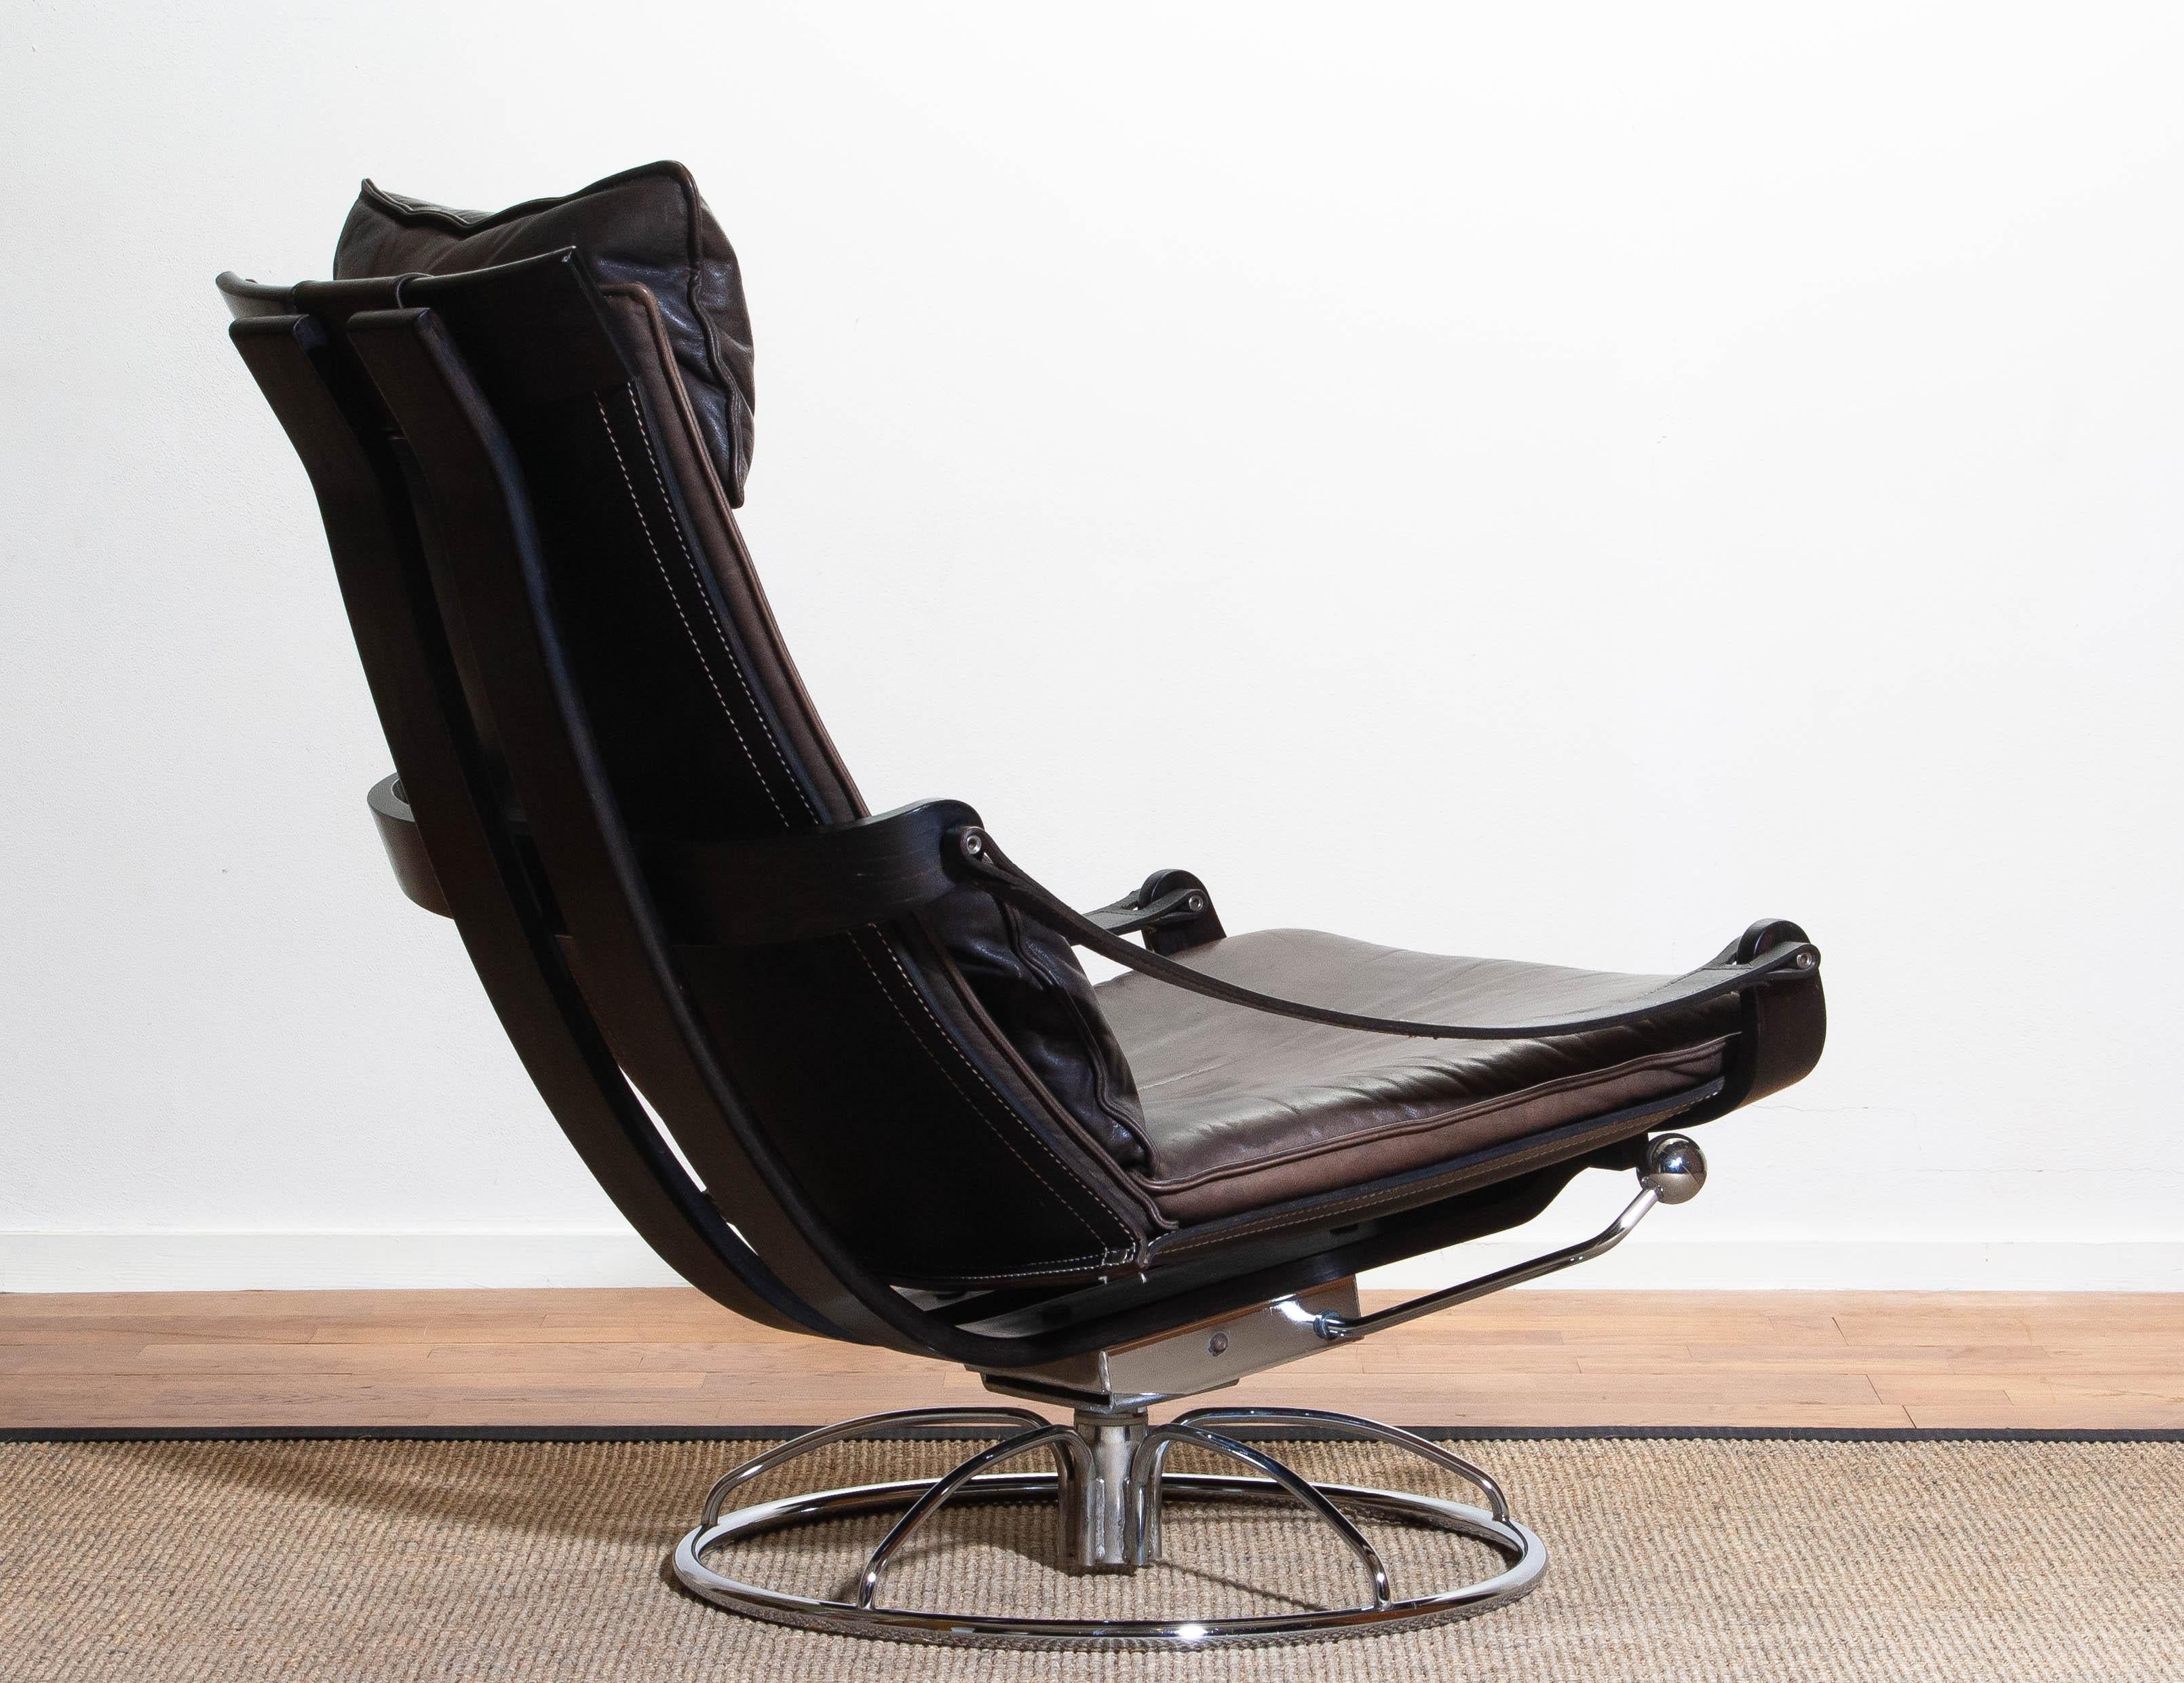 1970s Artistic Leather Swivel or Relax Chair by Ake Fribytter for Nelo, Sweden 1